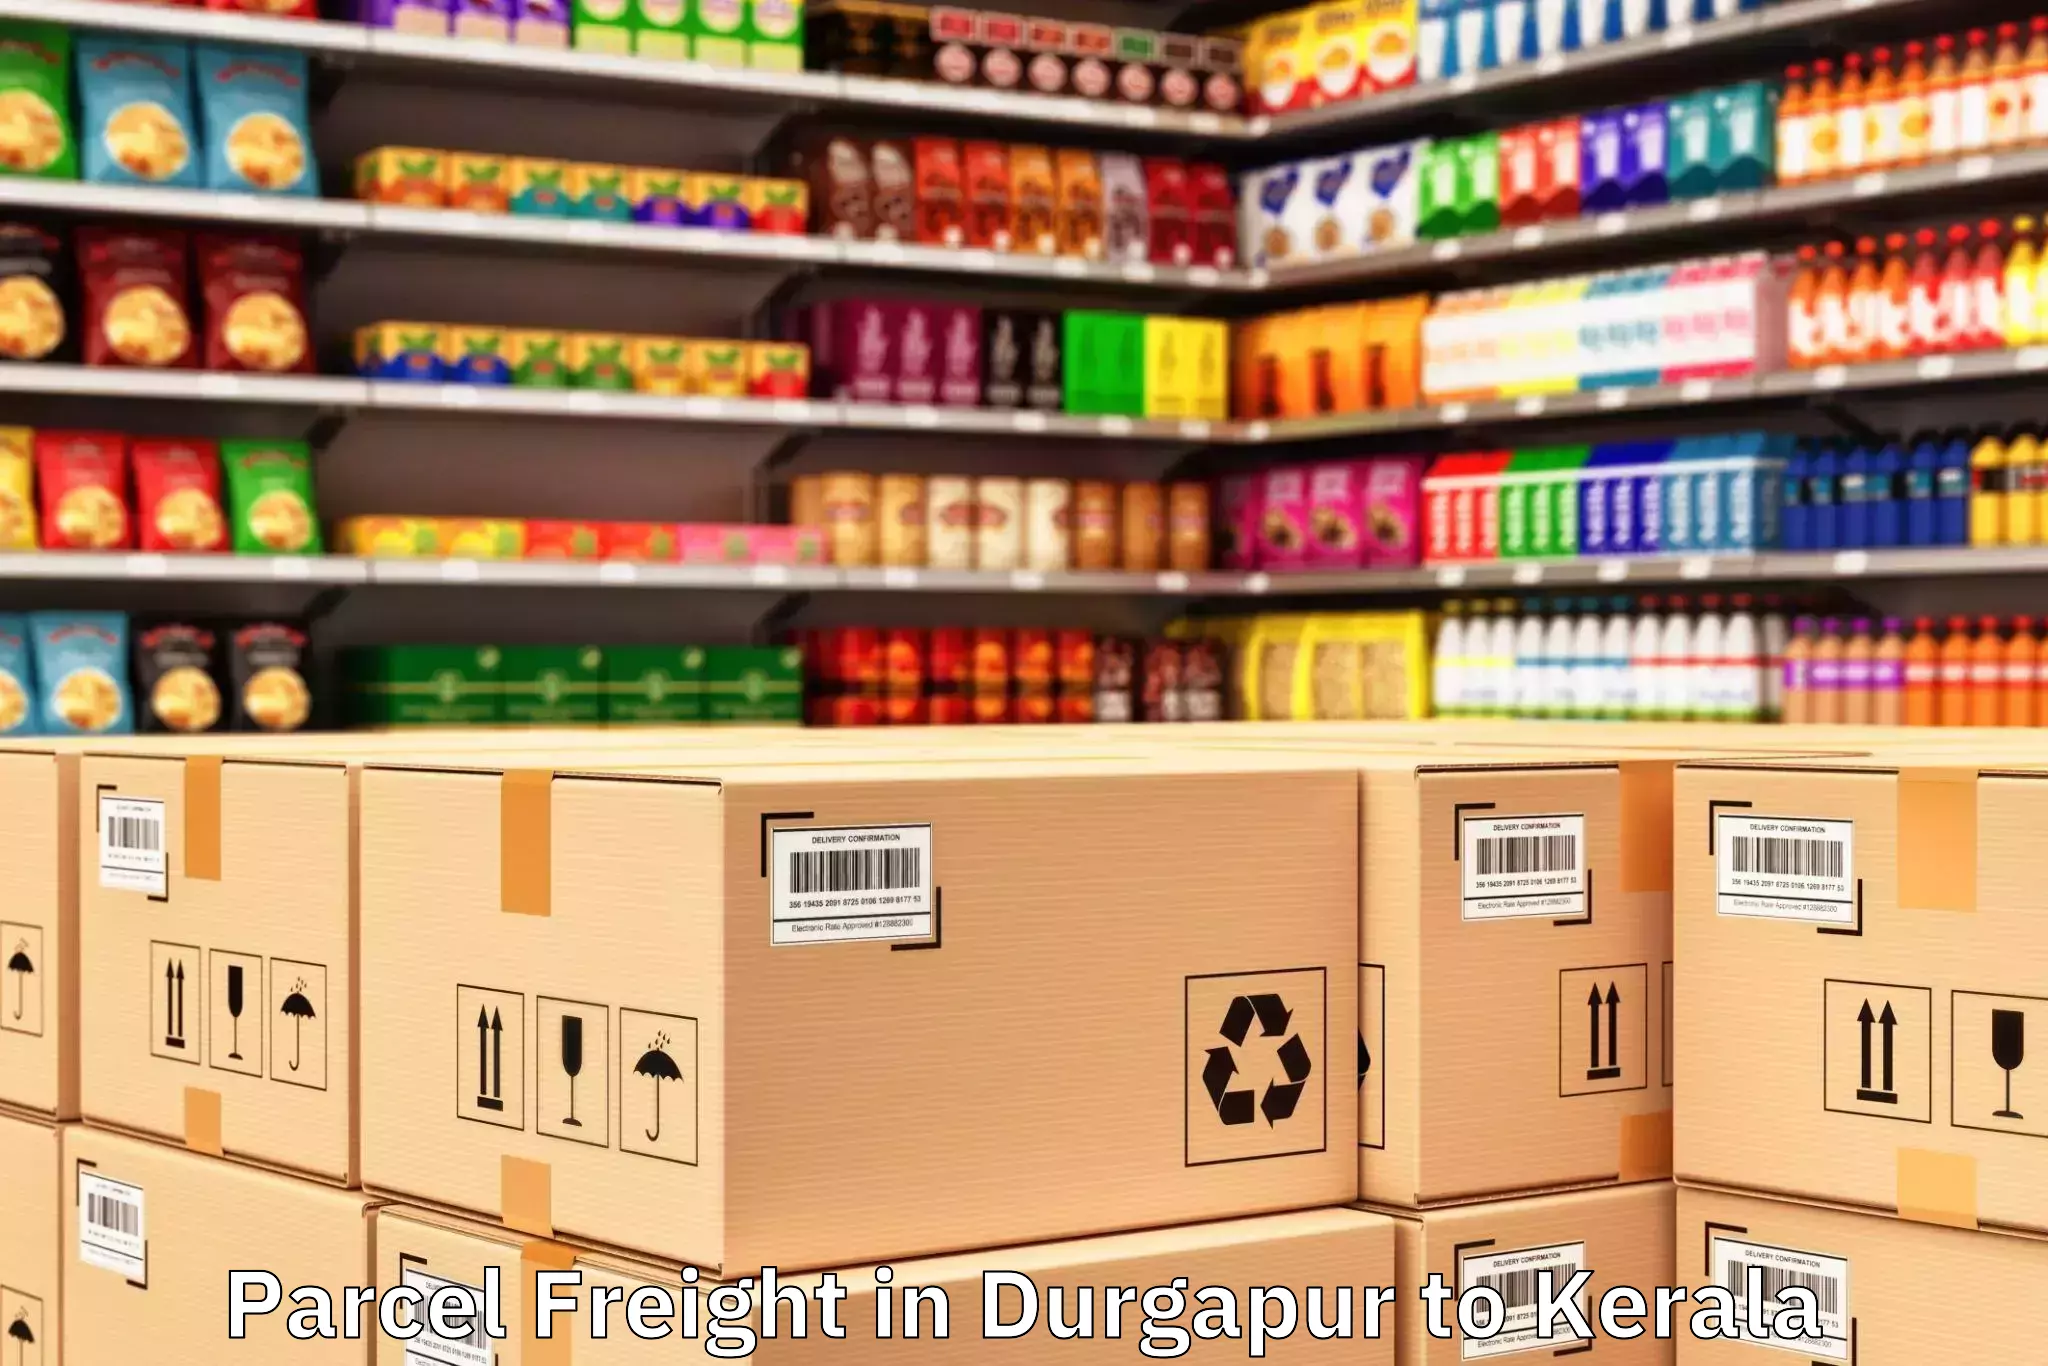 Top Durgapur to Kuttampuzha Parcel Freight Available